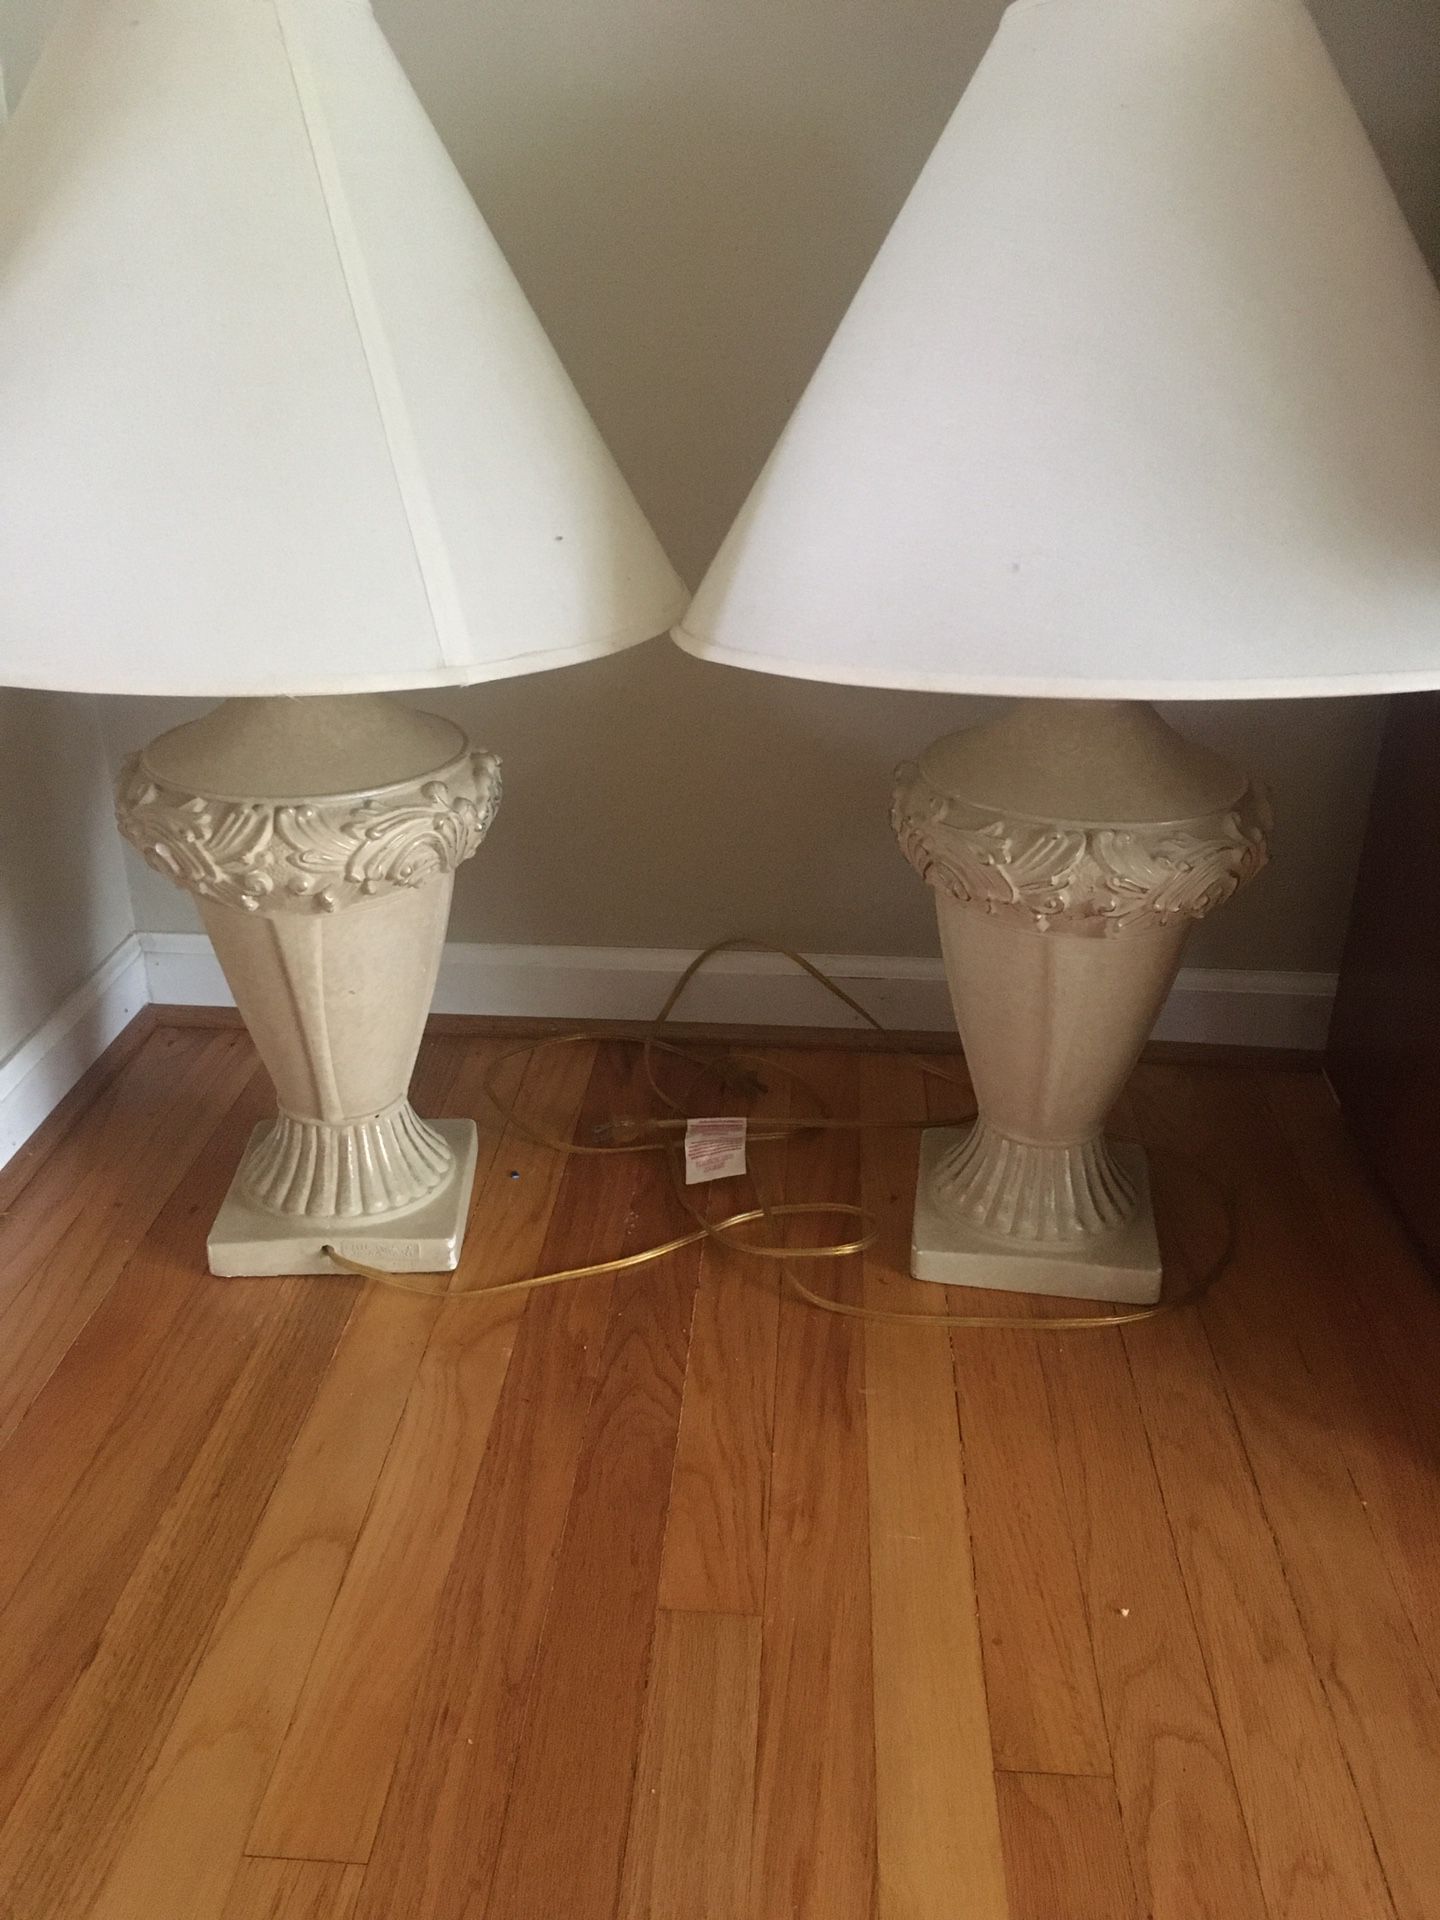 Two beautiful table lamps